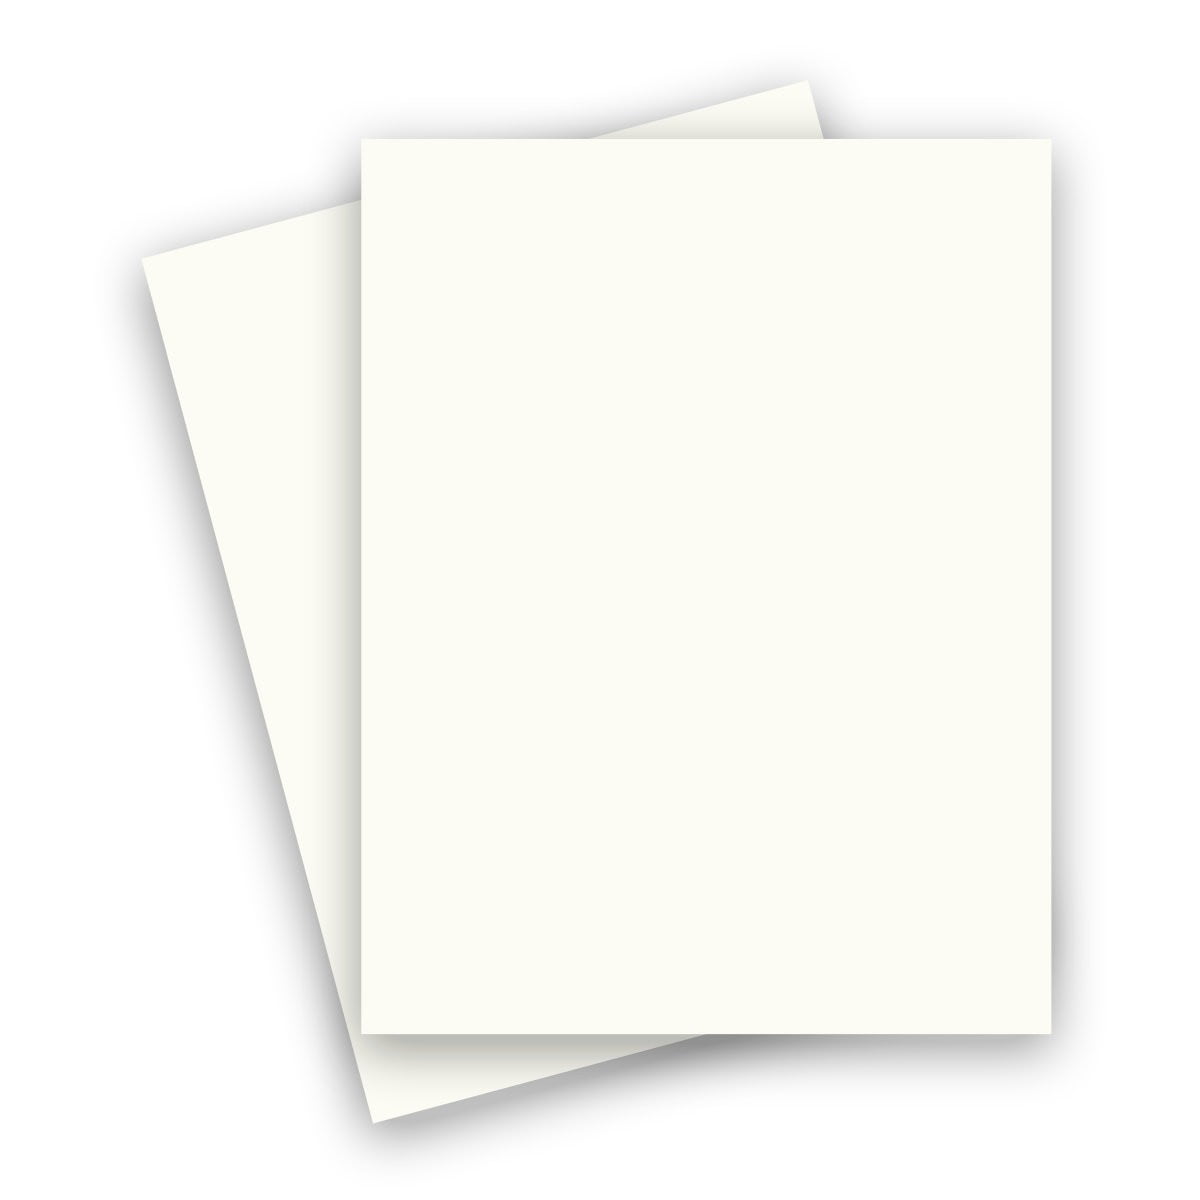 Metallic PEARLIZED QUARTZ 11X17 (Ledger) Paper 105C Cardstock - 100 PK --  Pearlescent 11-x-17 Metallic Card Stock Paper - Great for Business, Card  Making, Designers & More 